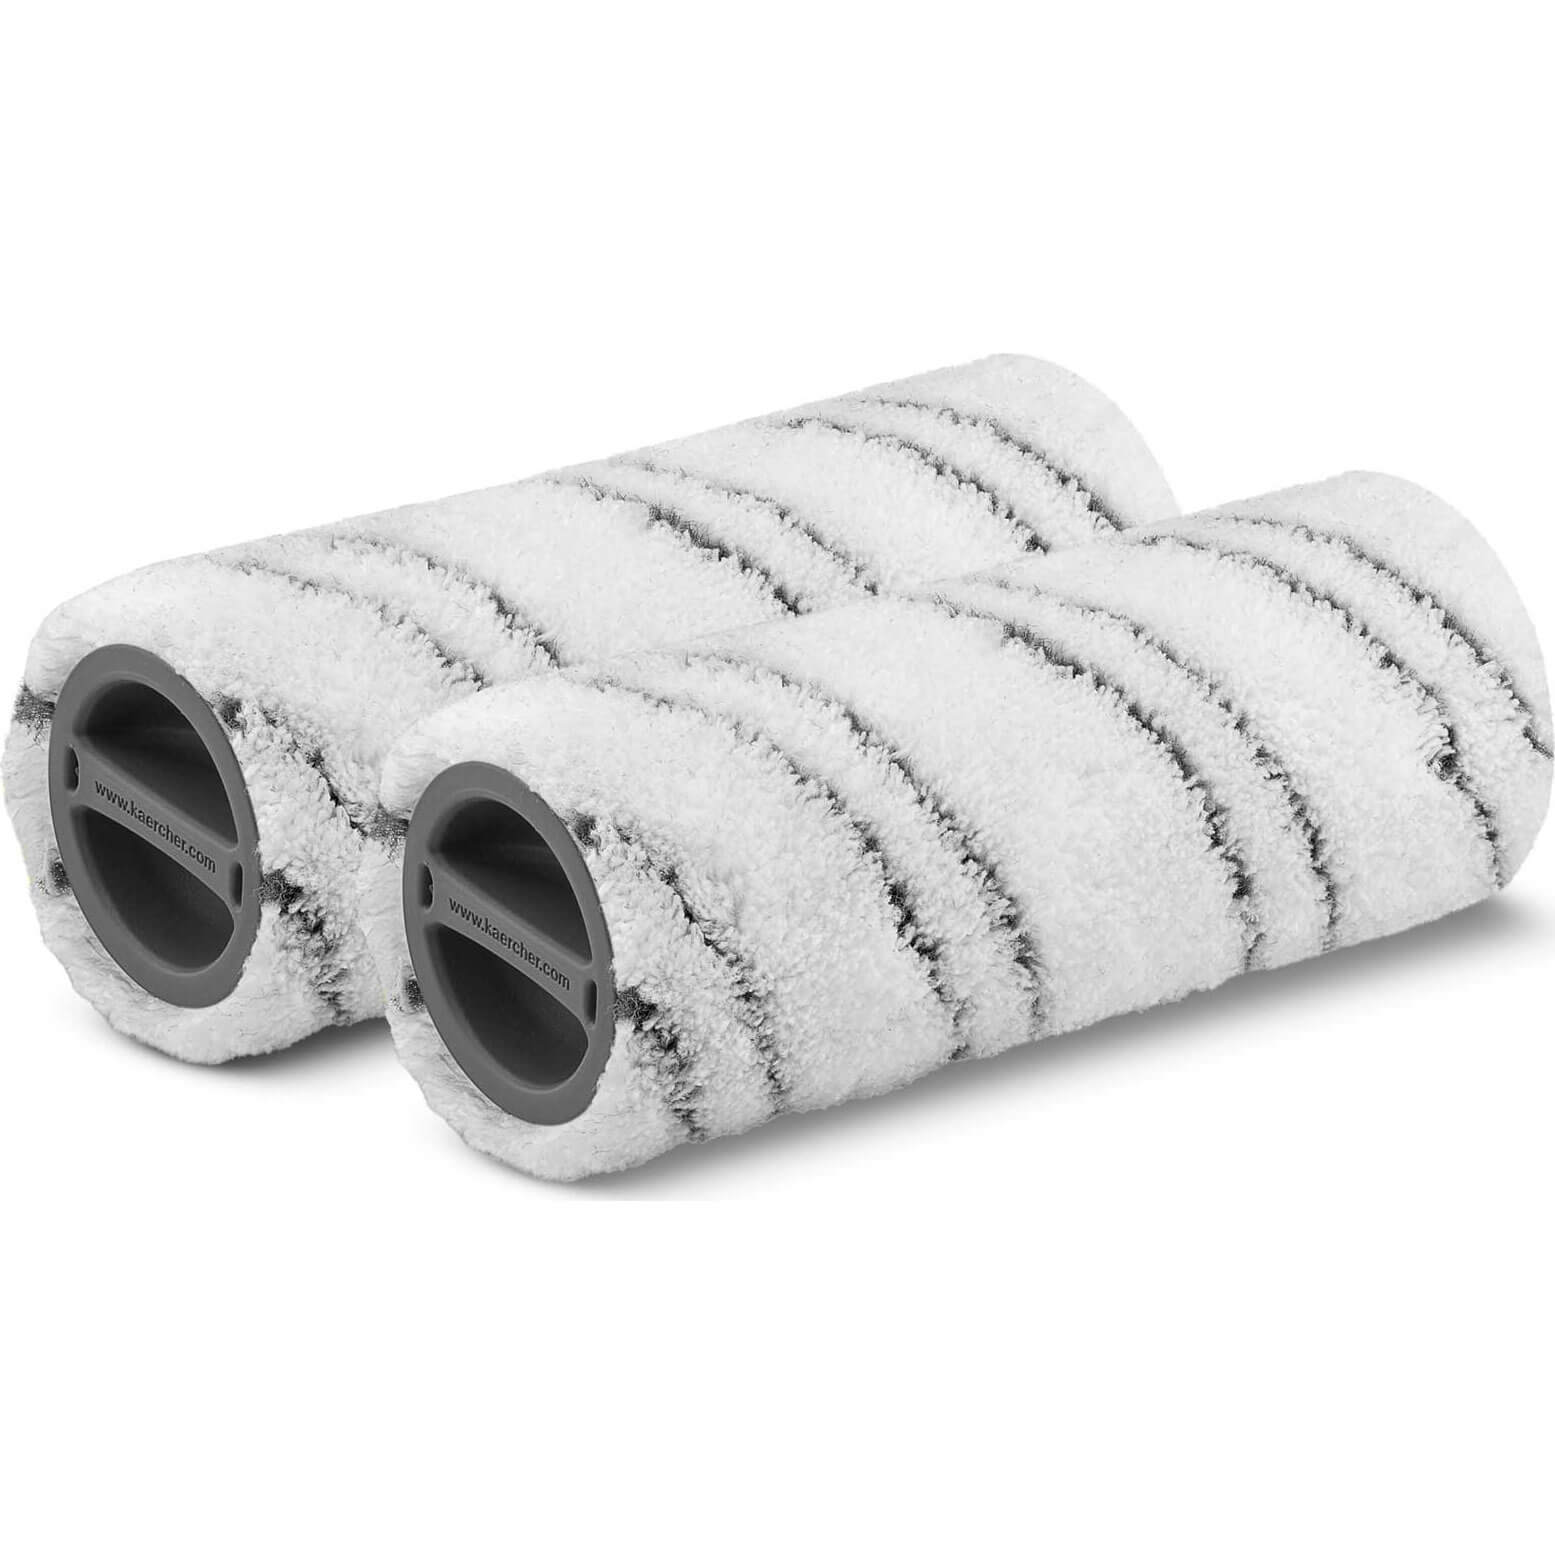 Image of Karcher Lint Free Rollers for FC 5 Floor Cleaners Grey Pack of 2